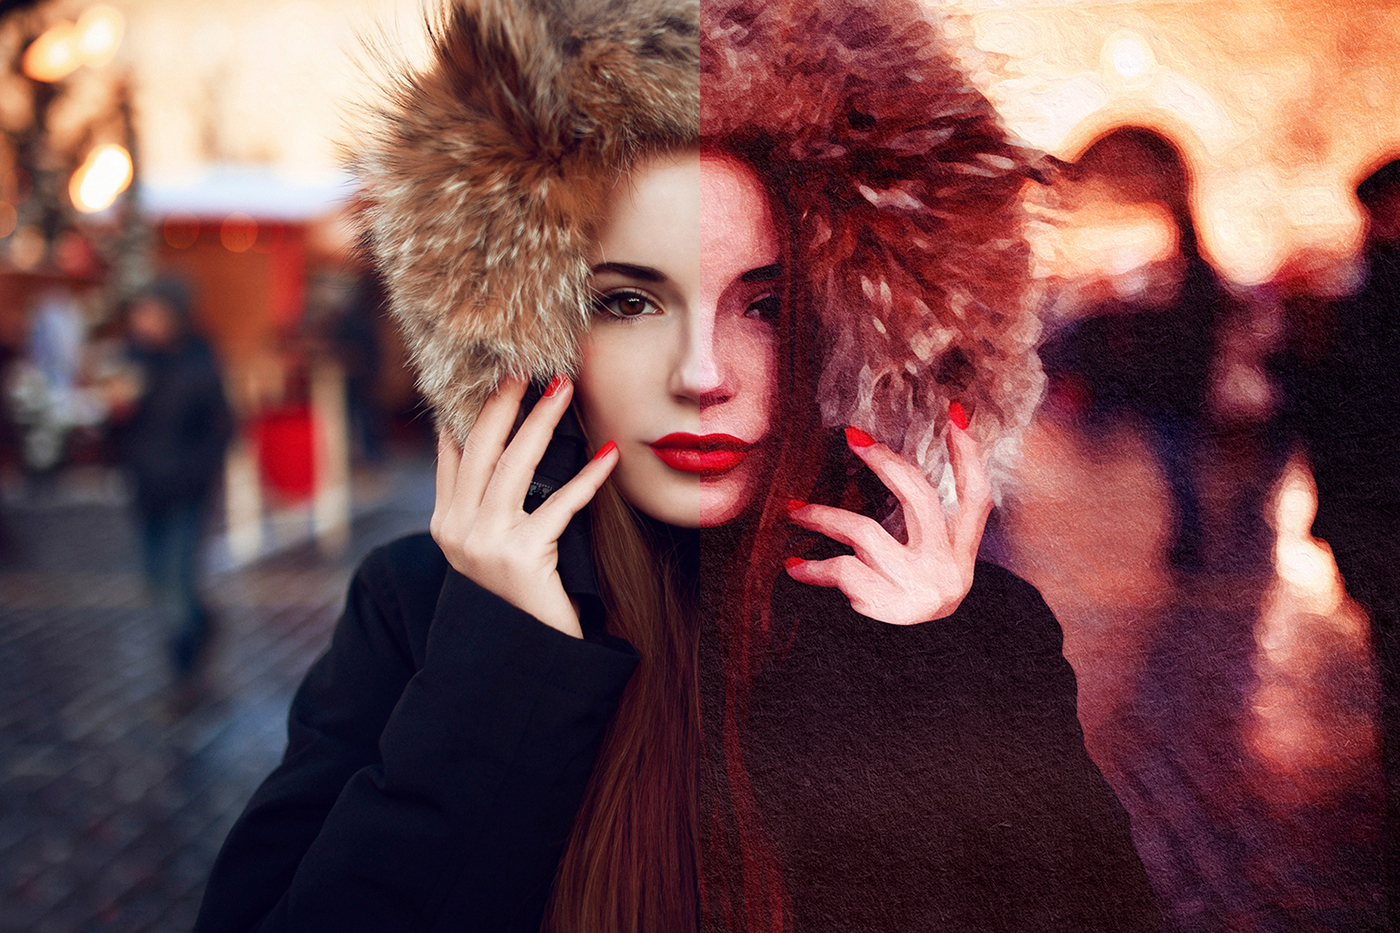 06 Painting Effect Photos - $4 on Behance